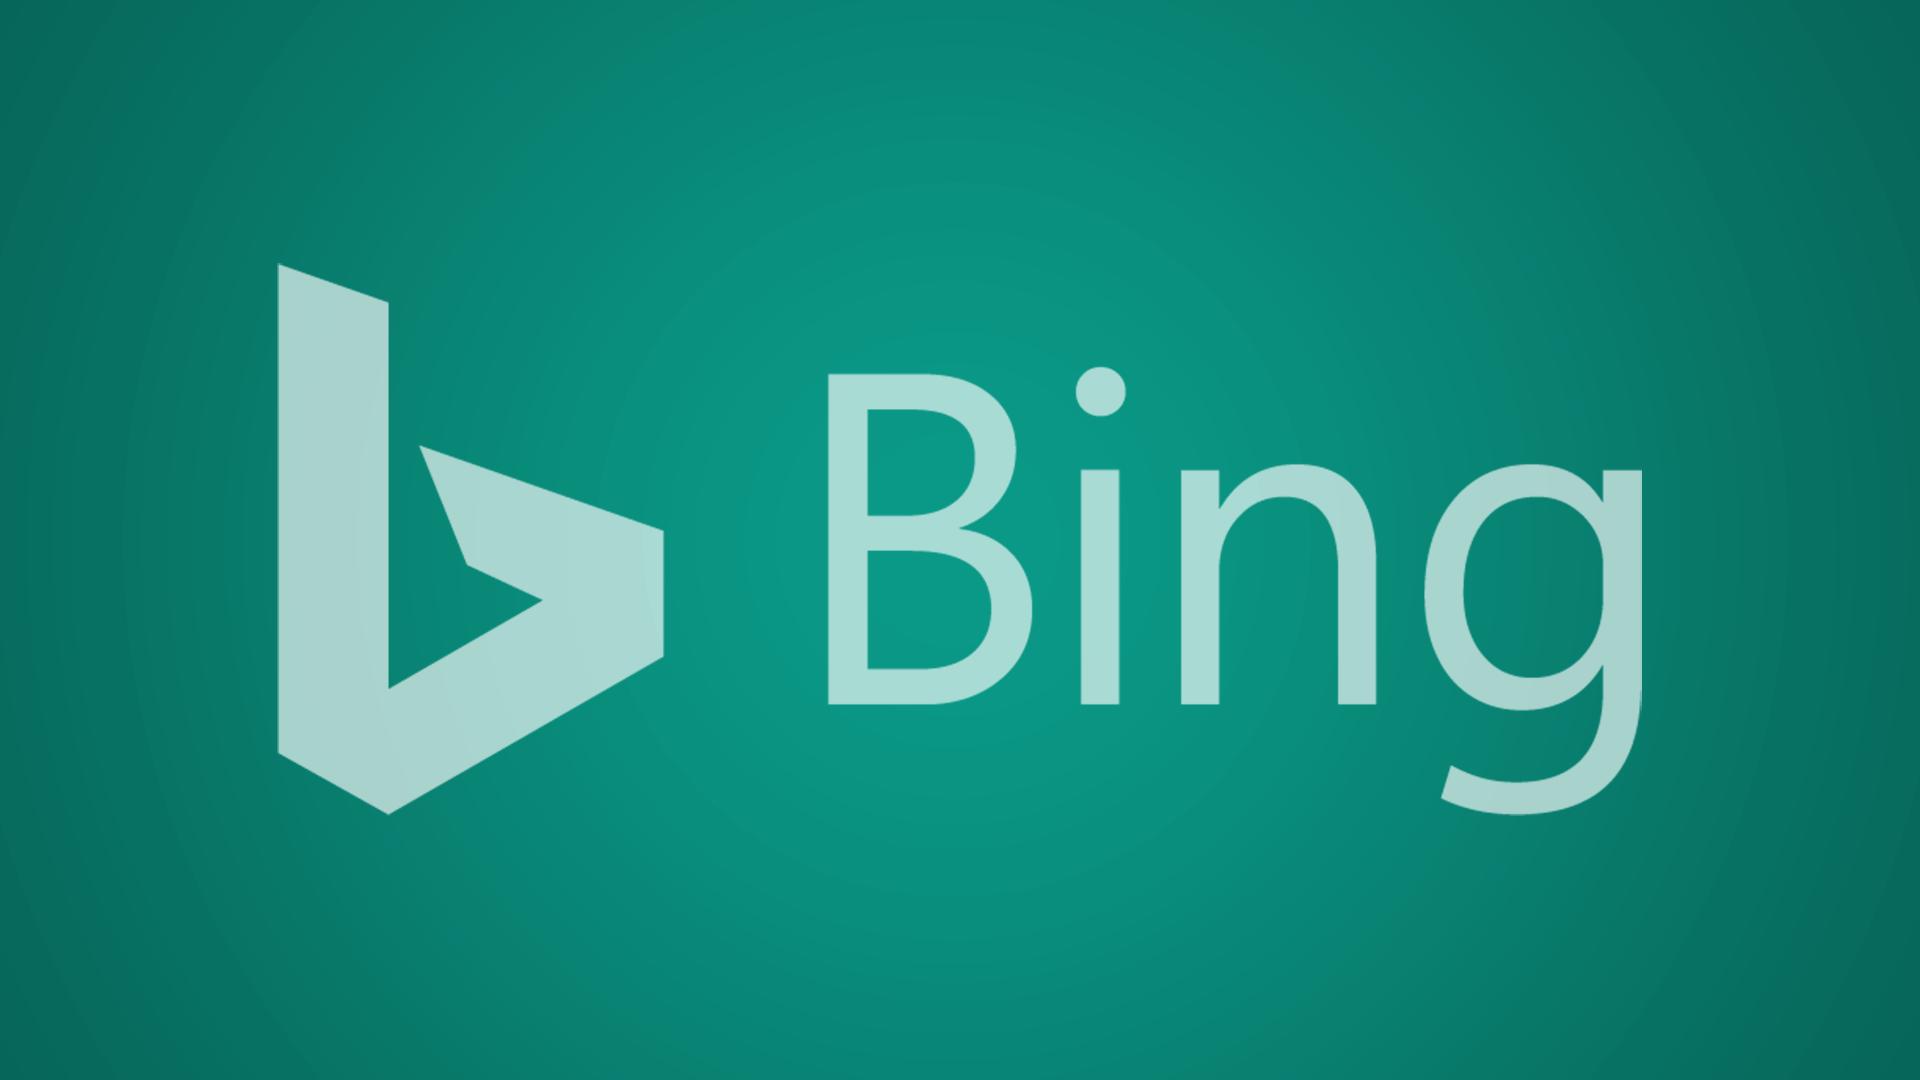 Bing Logo - Microsoft's Bing Search Engine Now Blocked in China | eLegal Philippines